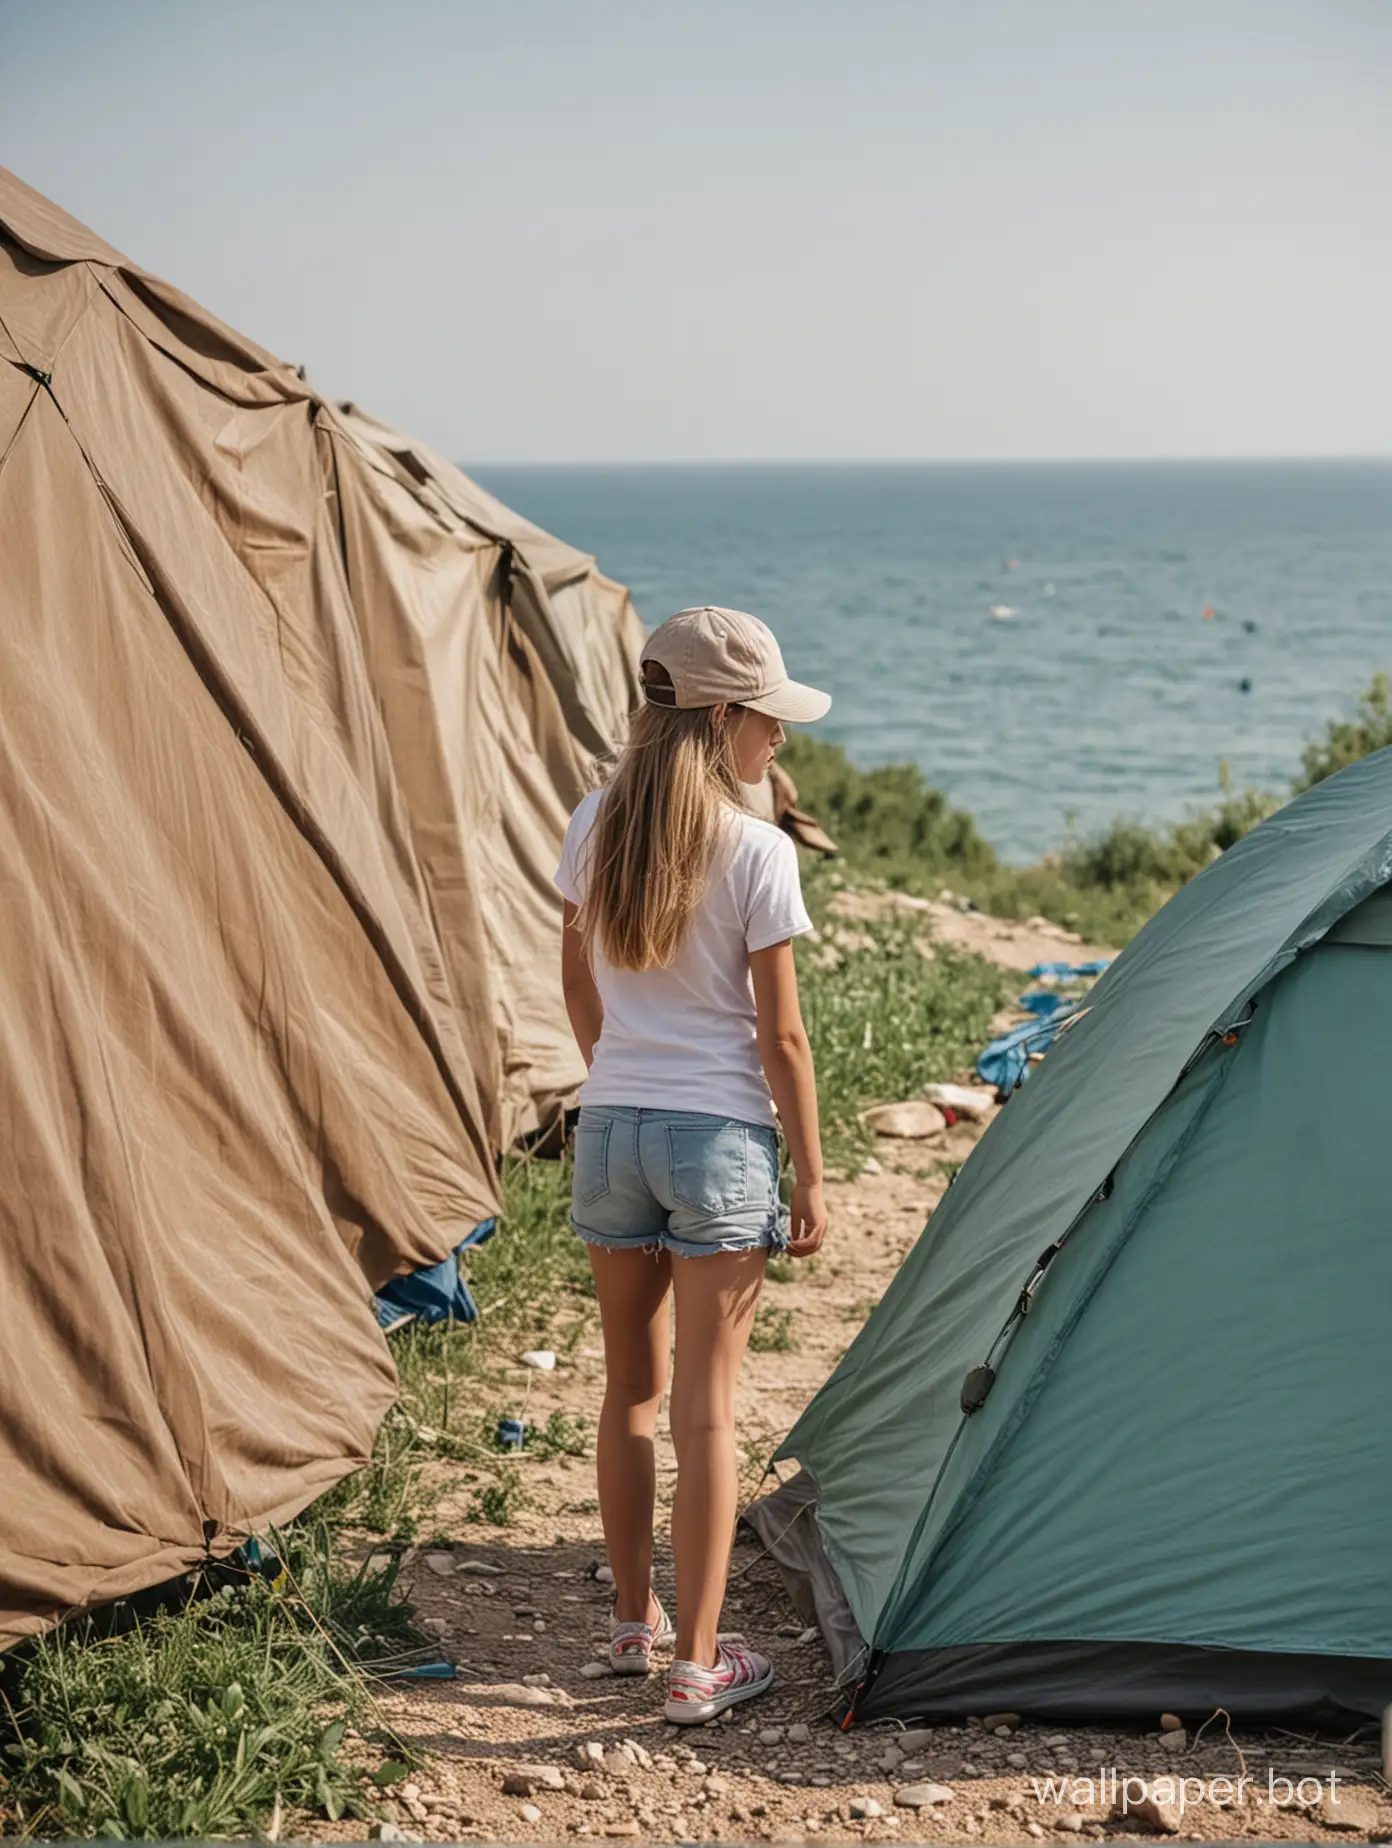 11-year-old girl in shorts and a cap by a tent in the distance, Crimea, sea in the distance, full-length, tents in the distance, dynamic poses, view from behind